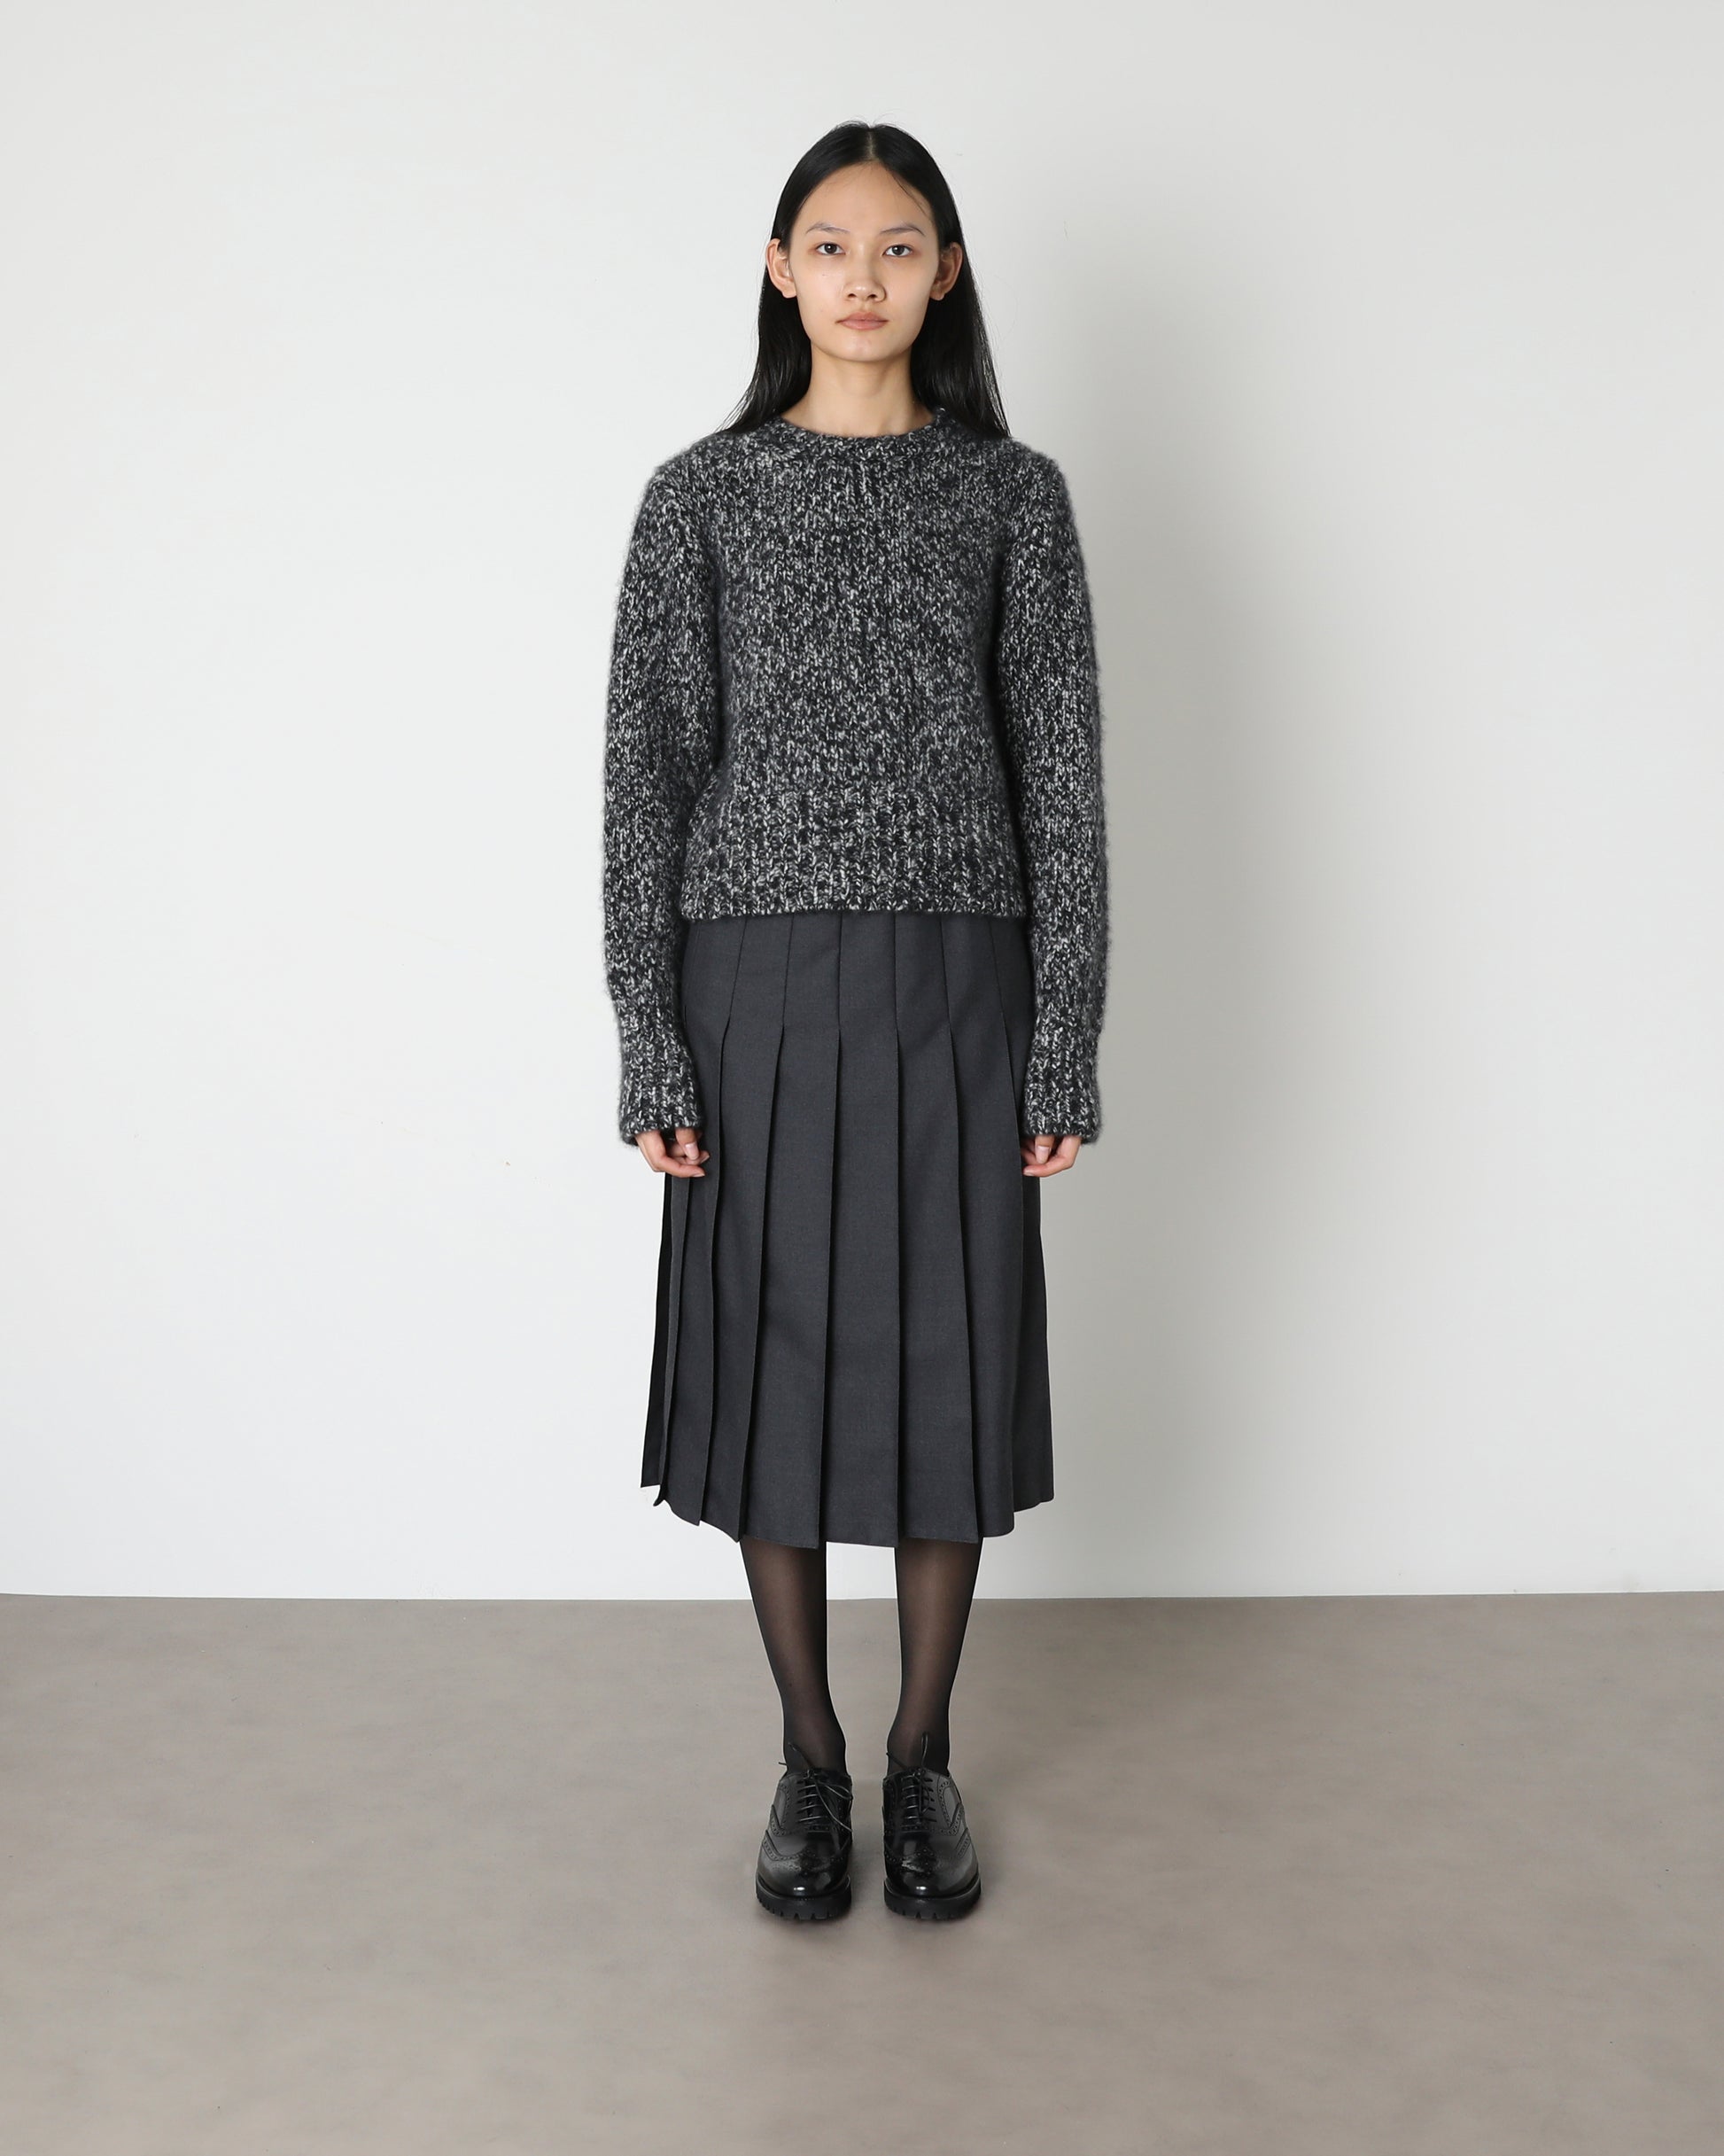 Issue Twelve Igloo Jumper in Silk Cashmere Black and White